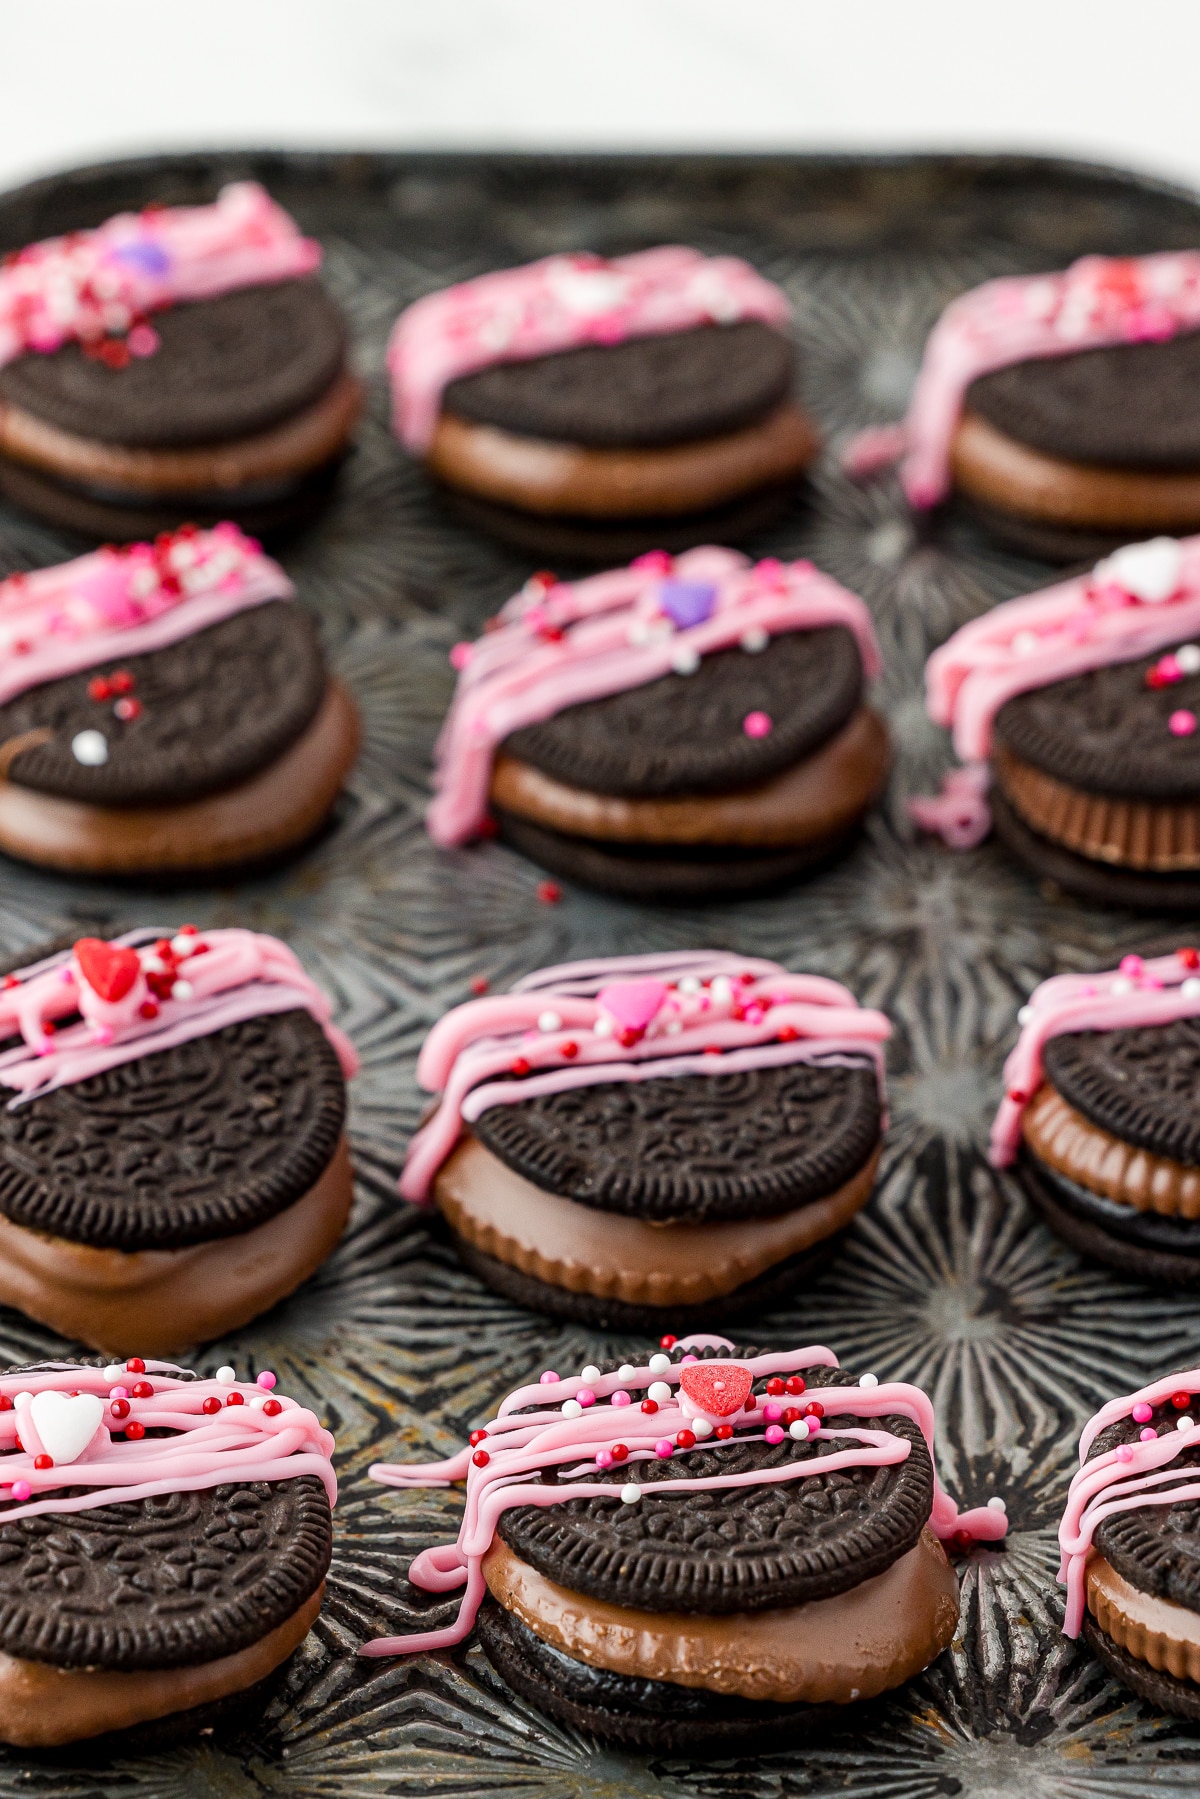 12 reese's oreos decorated for valentine's day with pink chocolate sitting on an antique metal pan.